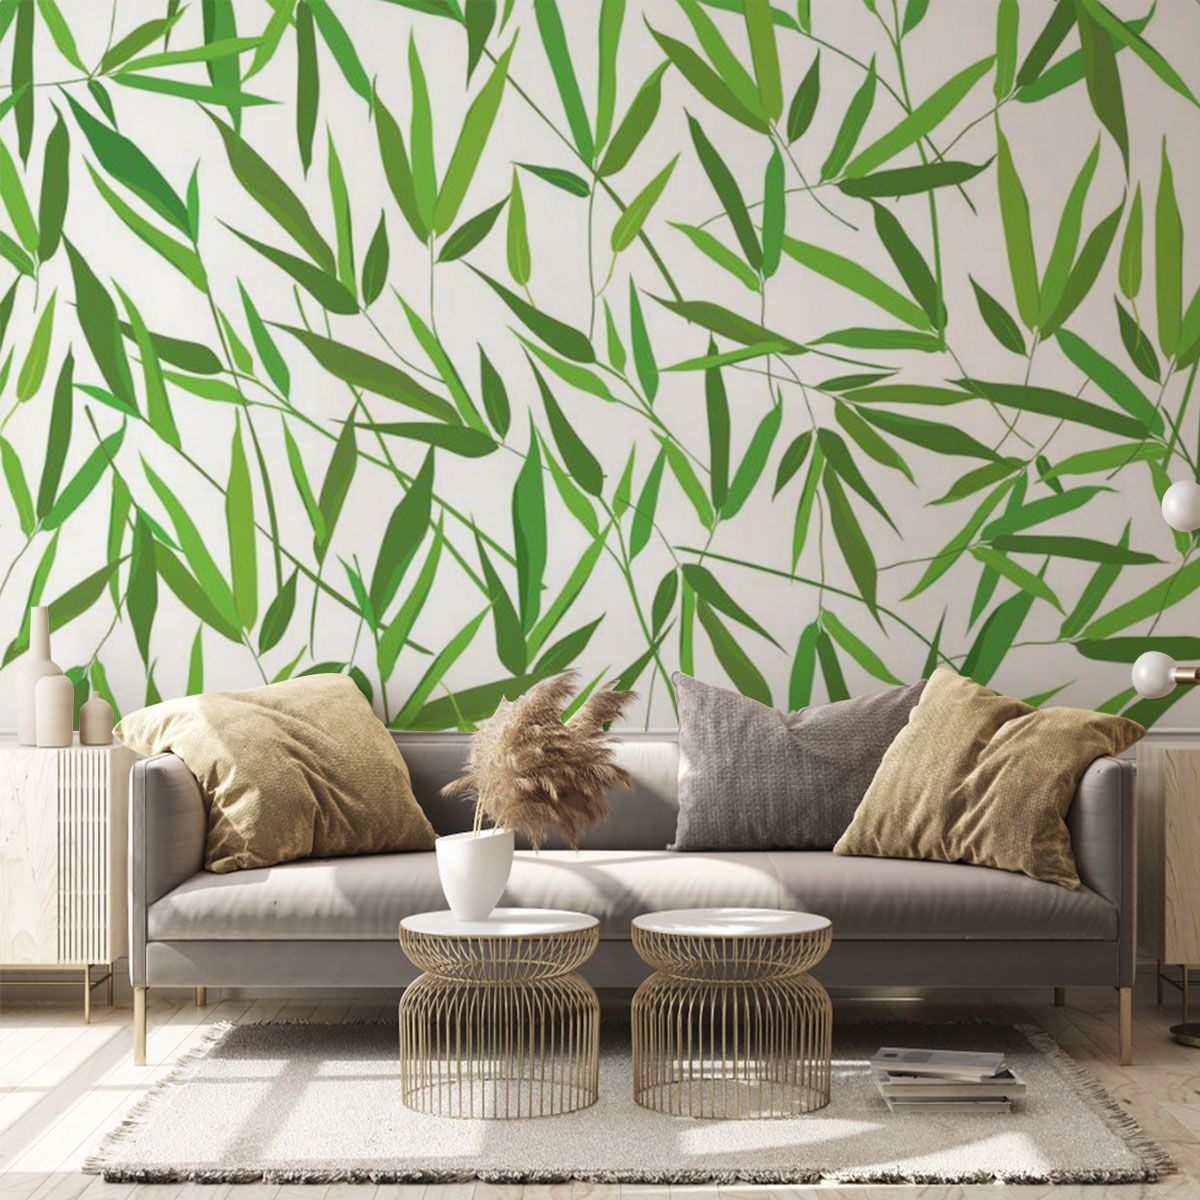 Floral Bamboo Leaves Wall Mural